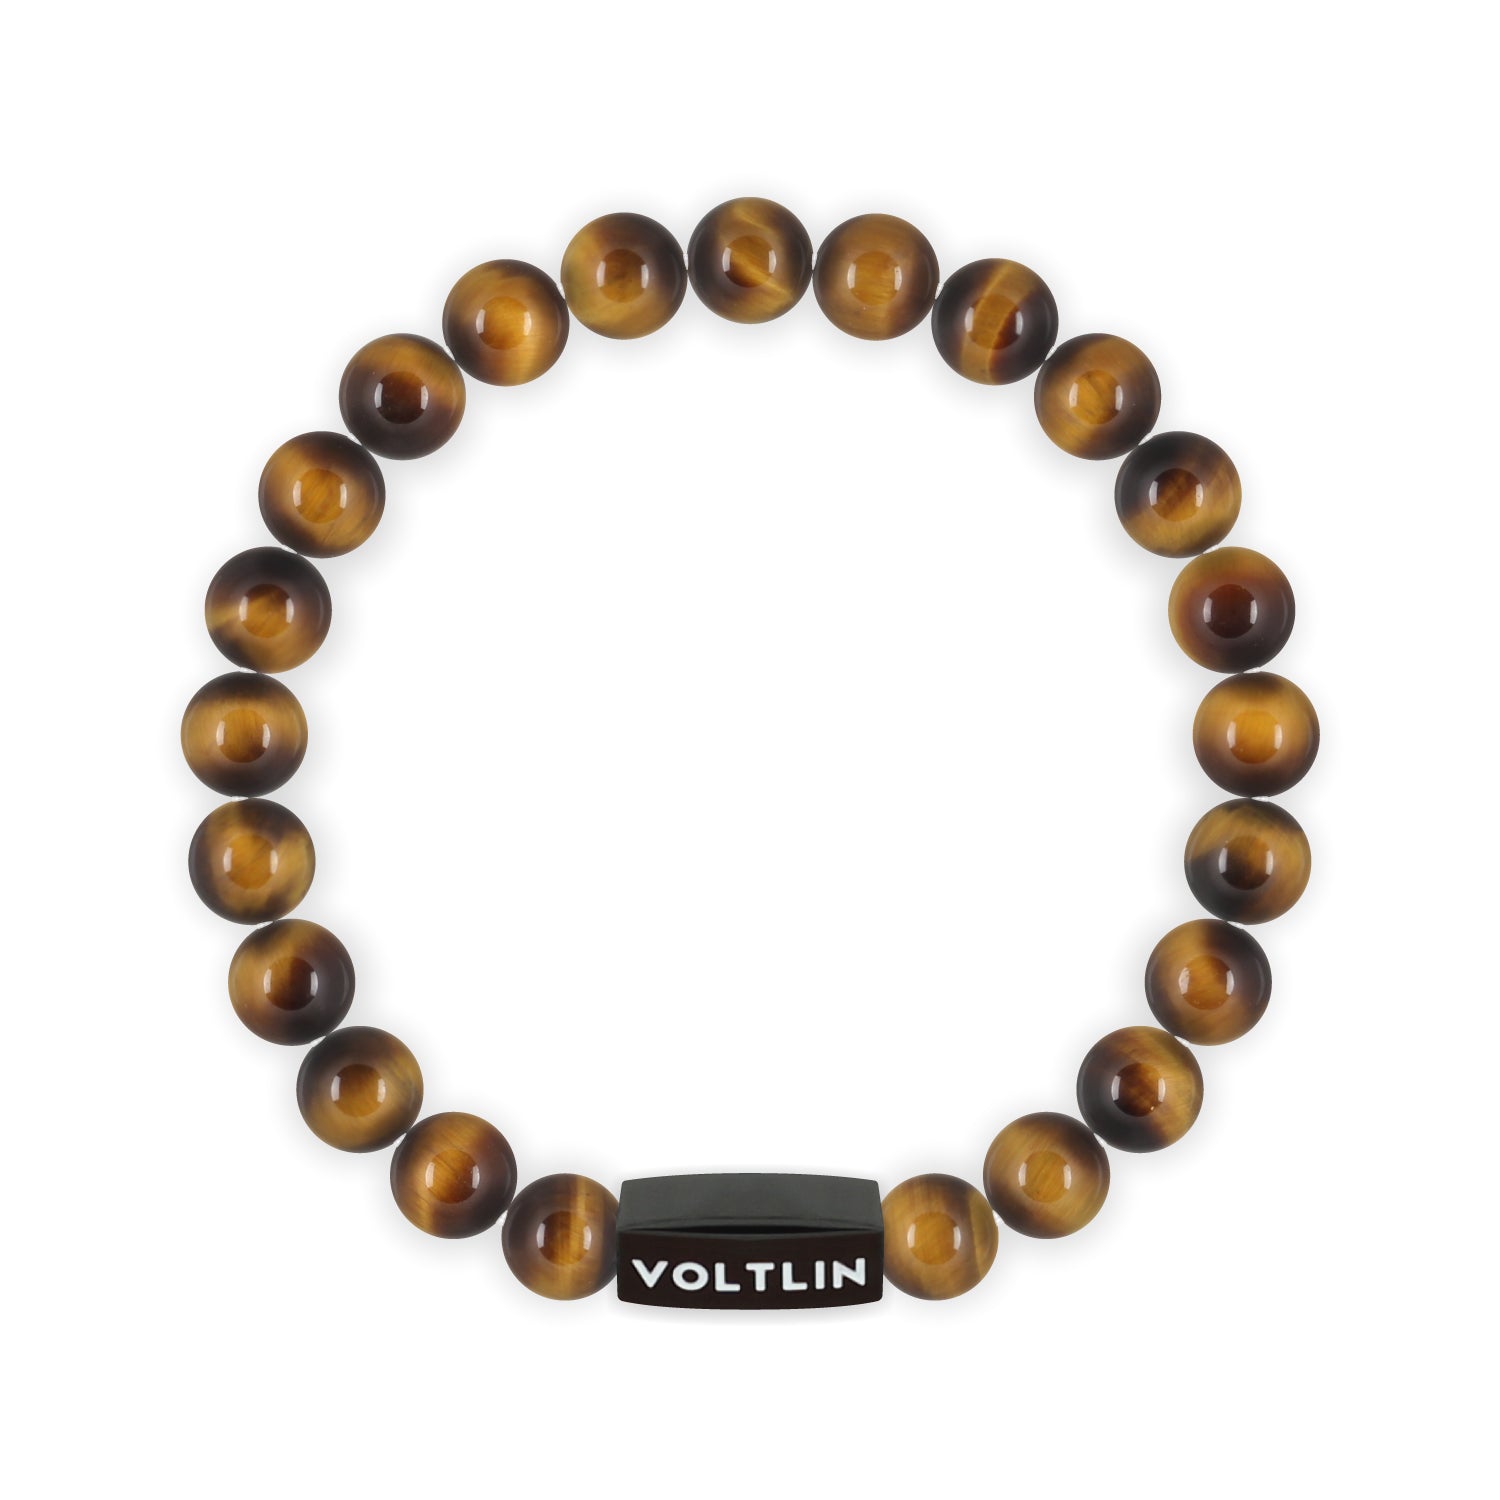 Front view of an 8mm Yellow Tigers Eye crystal beaded stretch bracelet with black stainless steel logo bead made by Voltlin